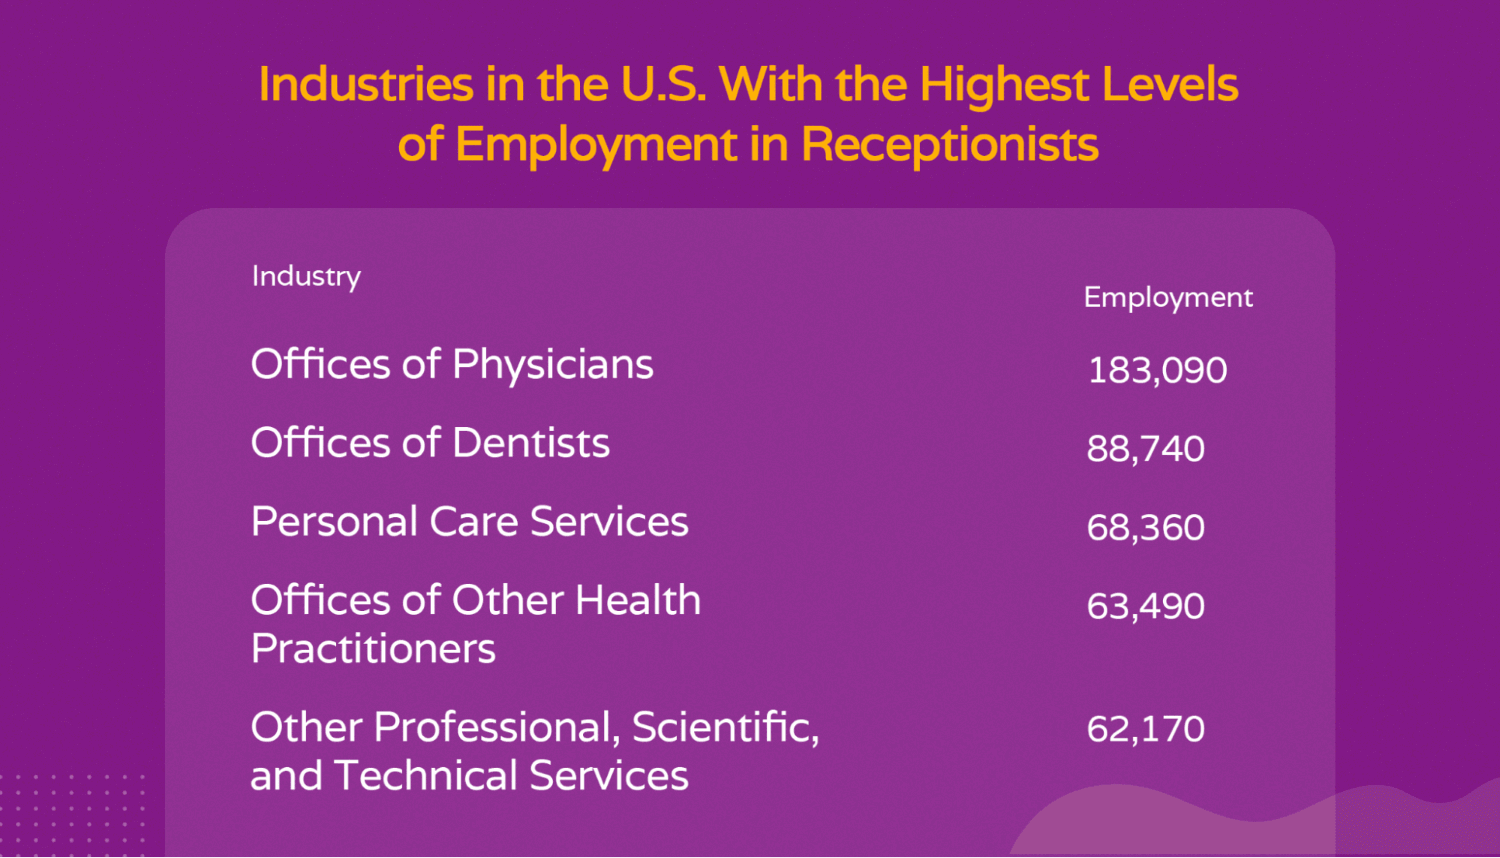 Table showing industries in the U.S. with the highest employment rate of receptionists